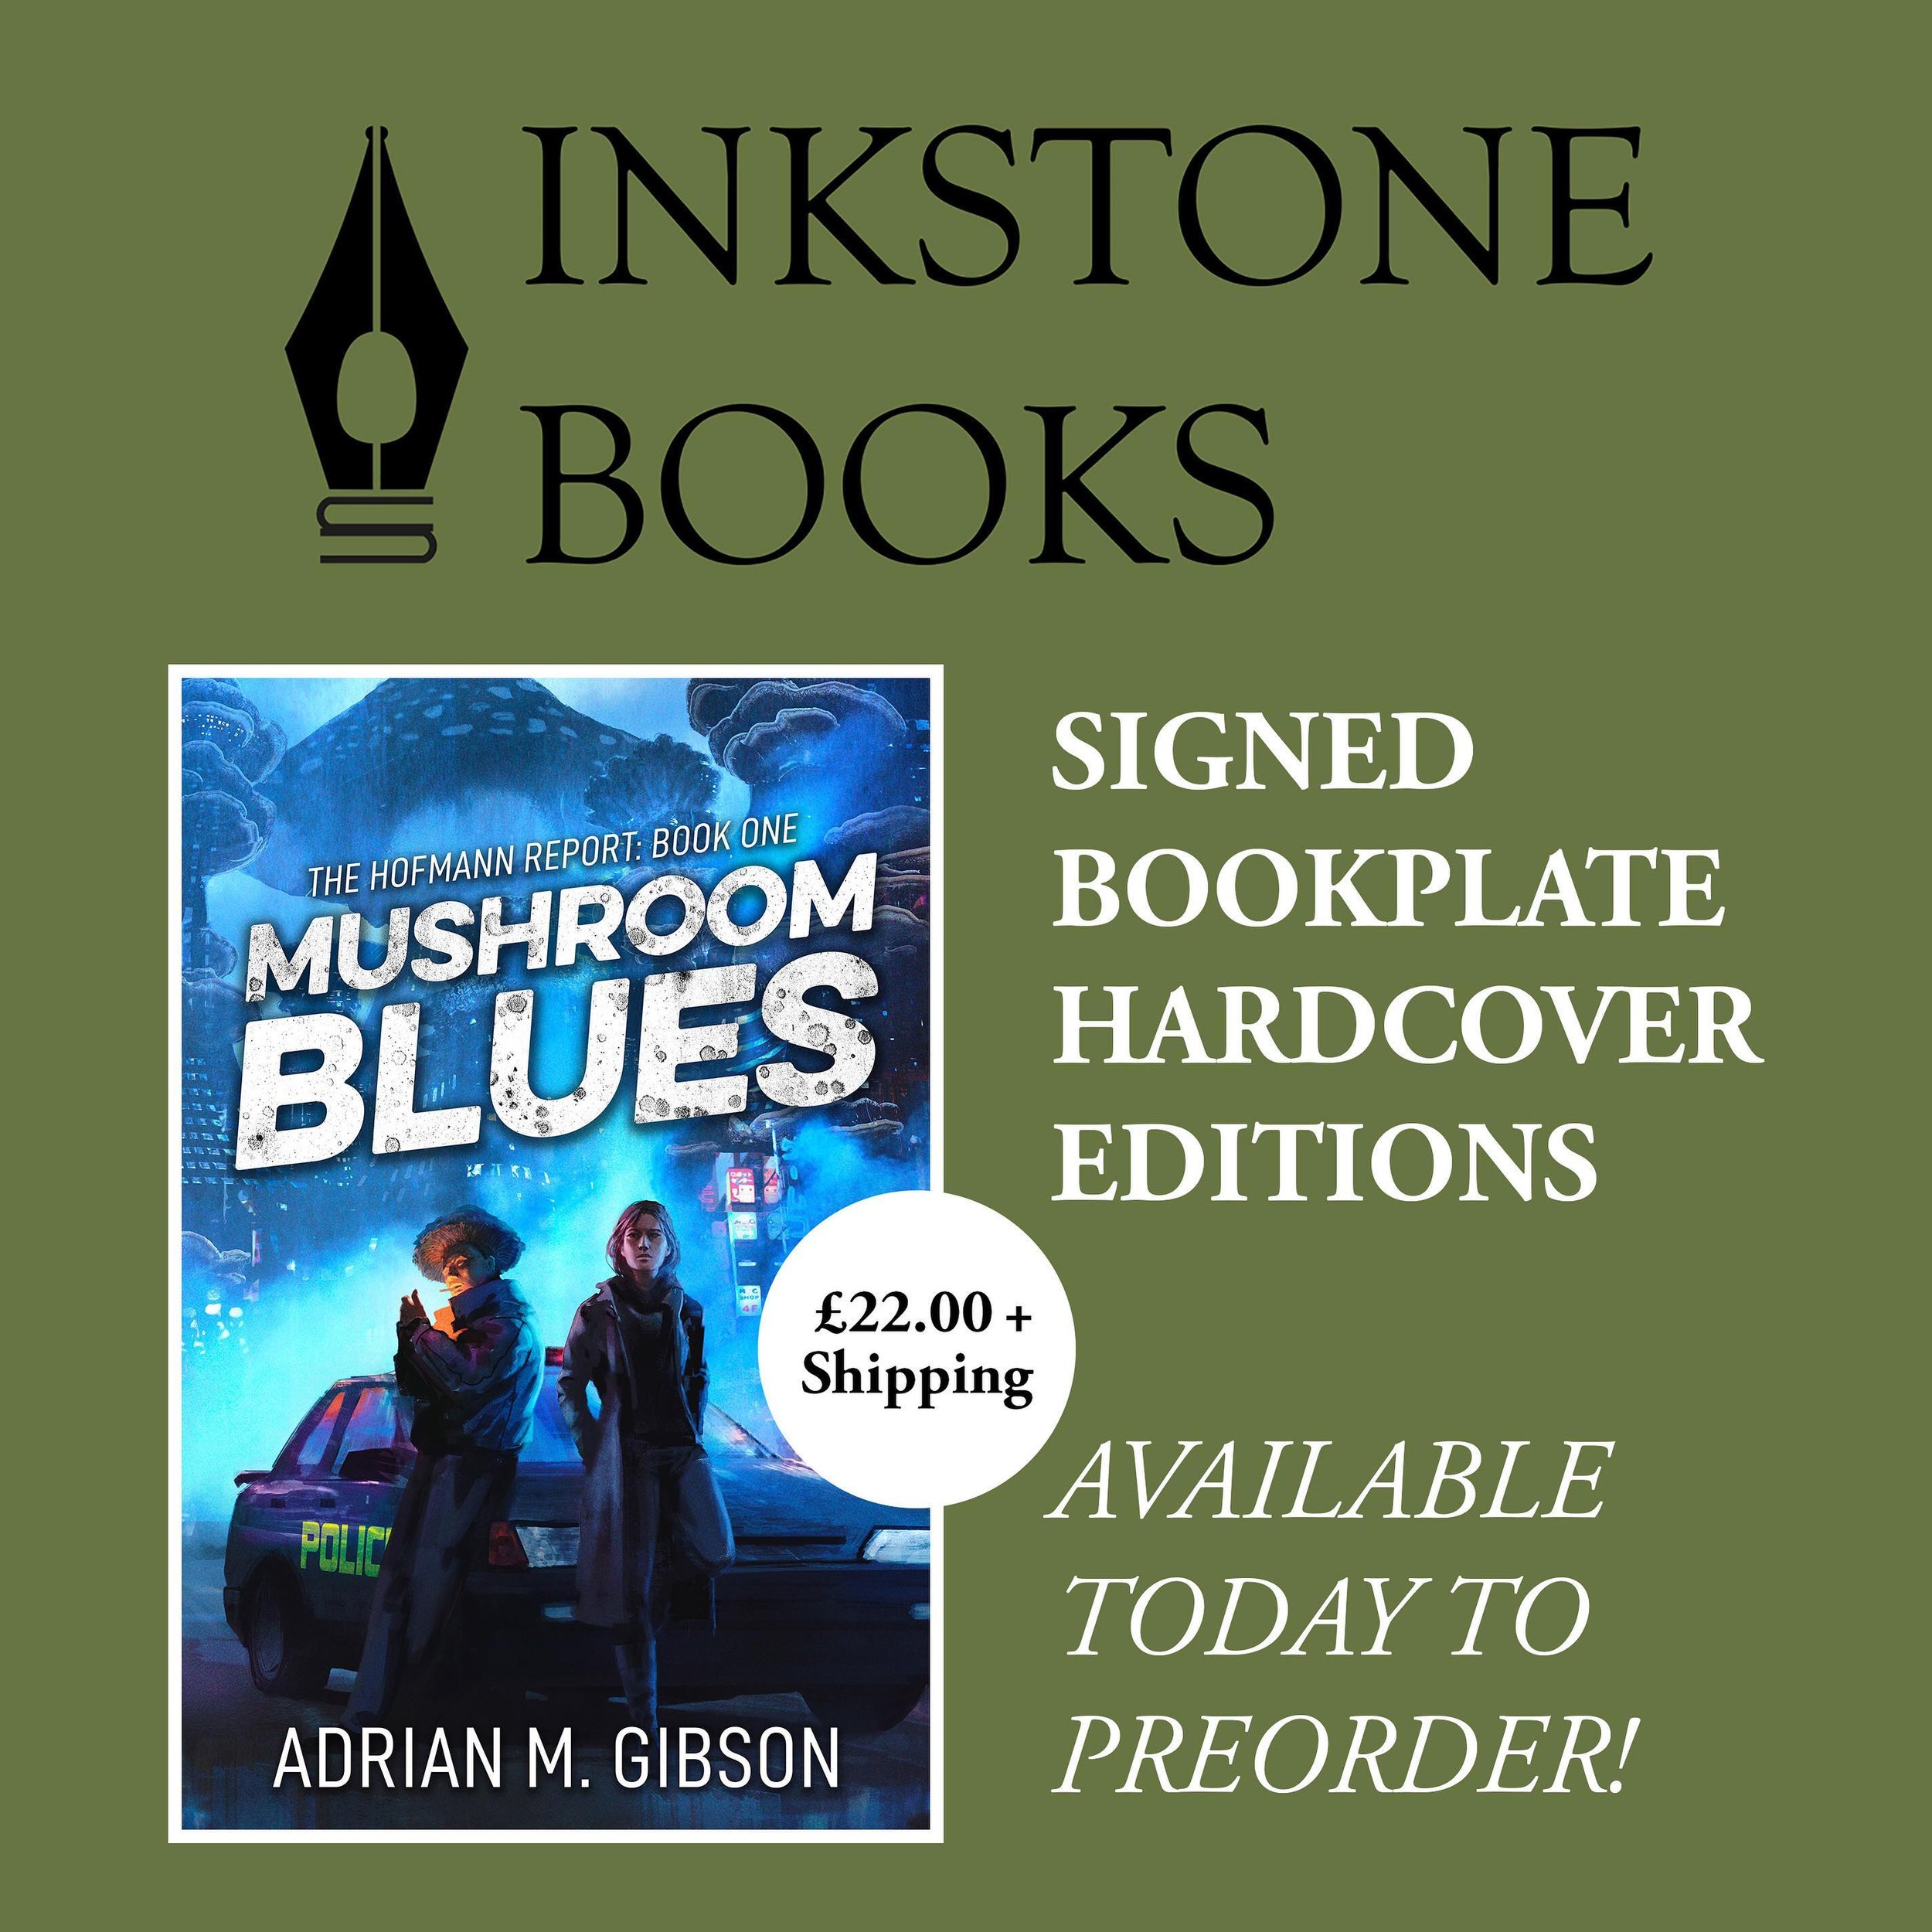 🍄 SIGNED BOOKPLATE HARDCOVERS 🍄
Preorders are now open for #MushroomBlues hardcovers with signed bookplates over on @inkstonebooks!

If you&rsquo;ve been wanting a signed copy, check out the link below: https://inkstonebooks.com/product/mushroom-bl